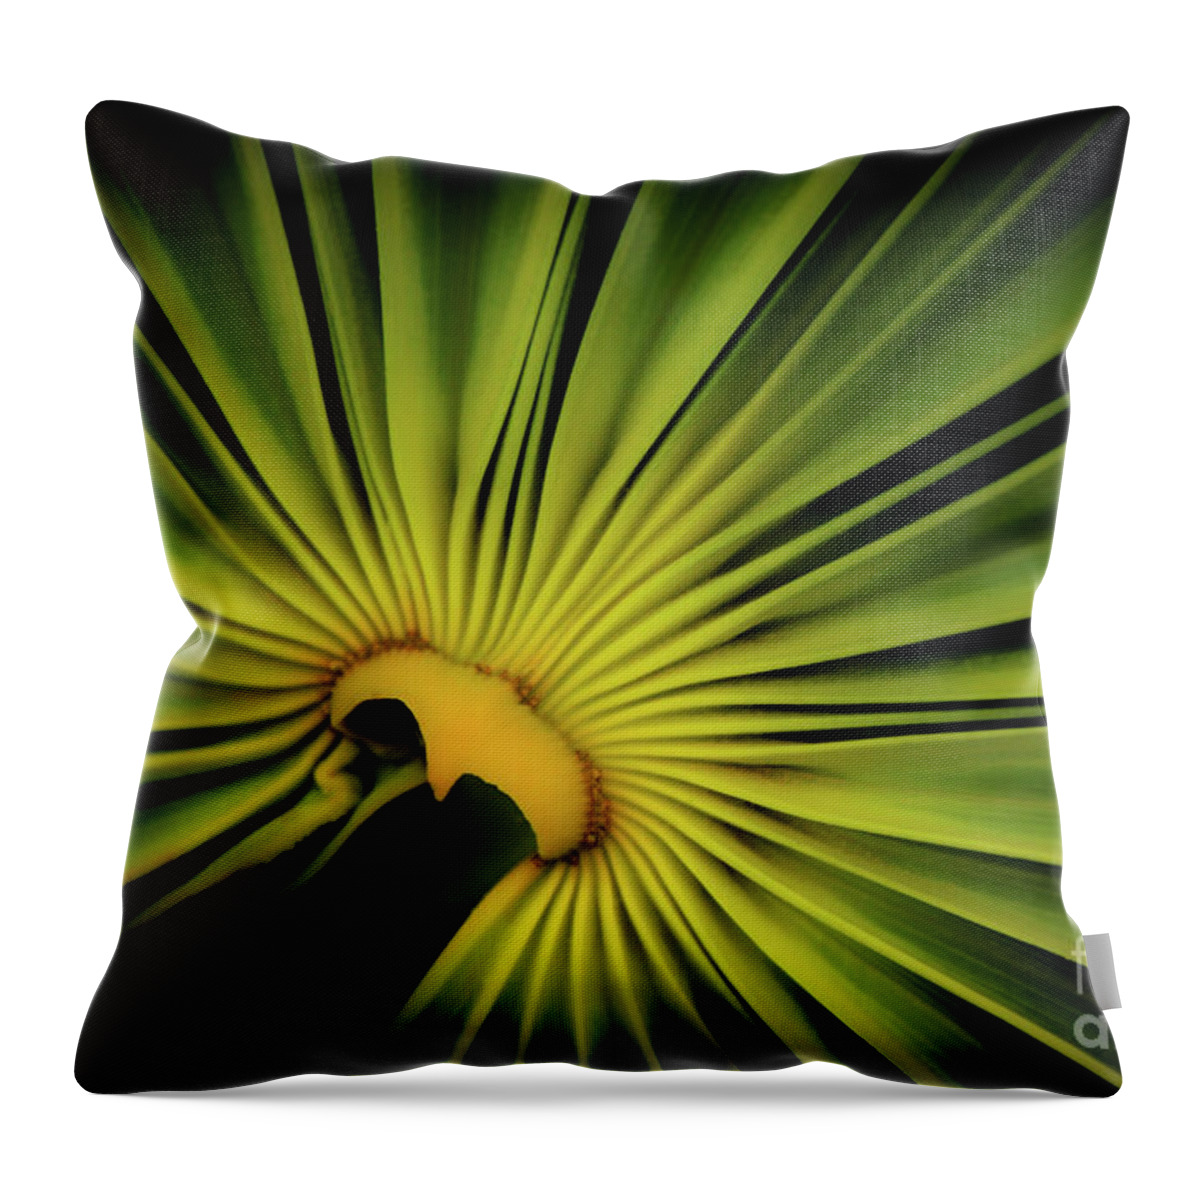 Foliage Throw Pillow featuring the photograph Foliage Burst by Becqi Sherman